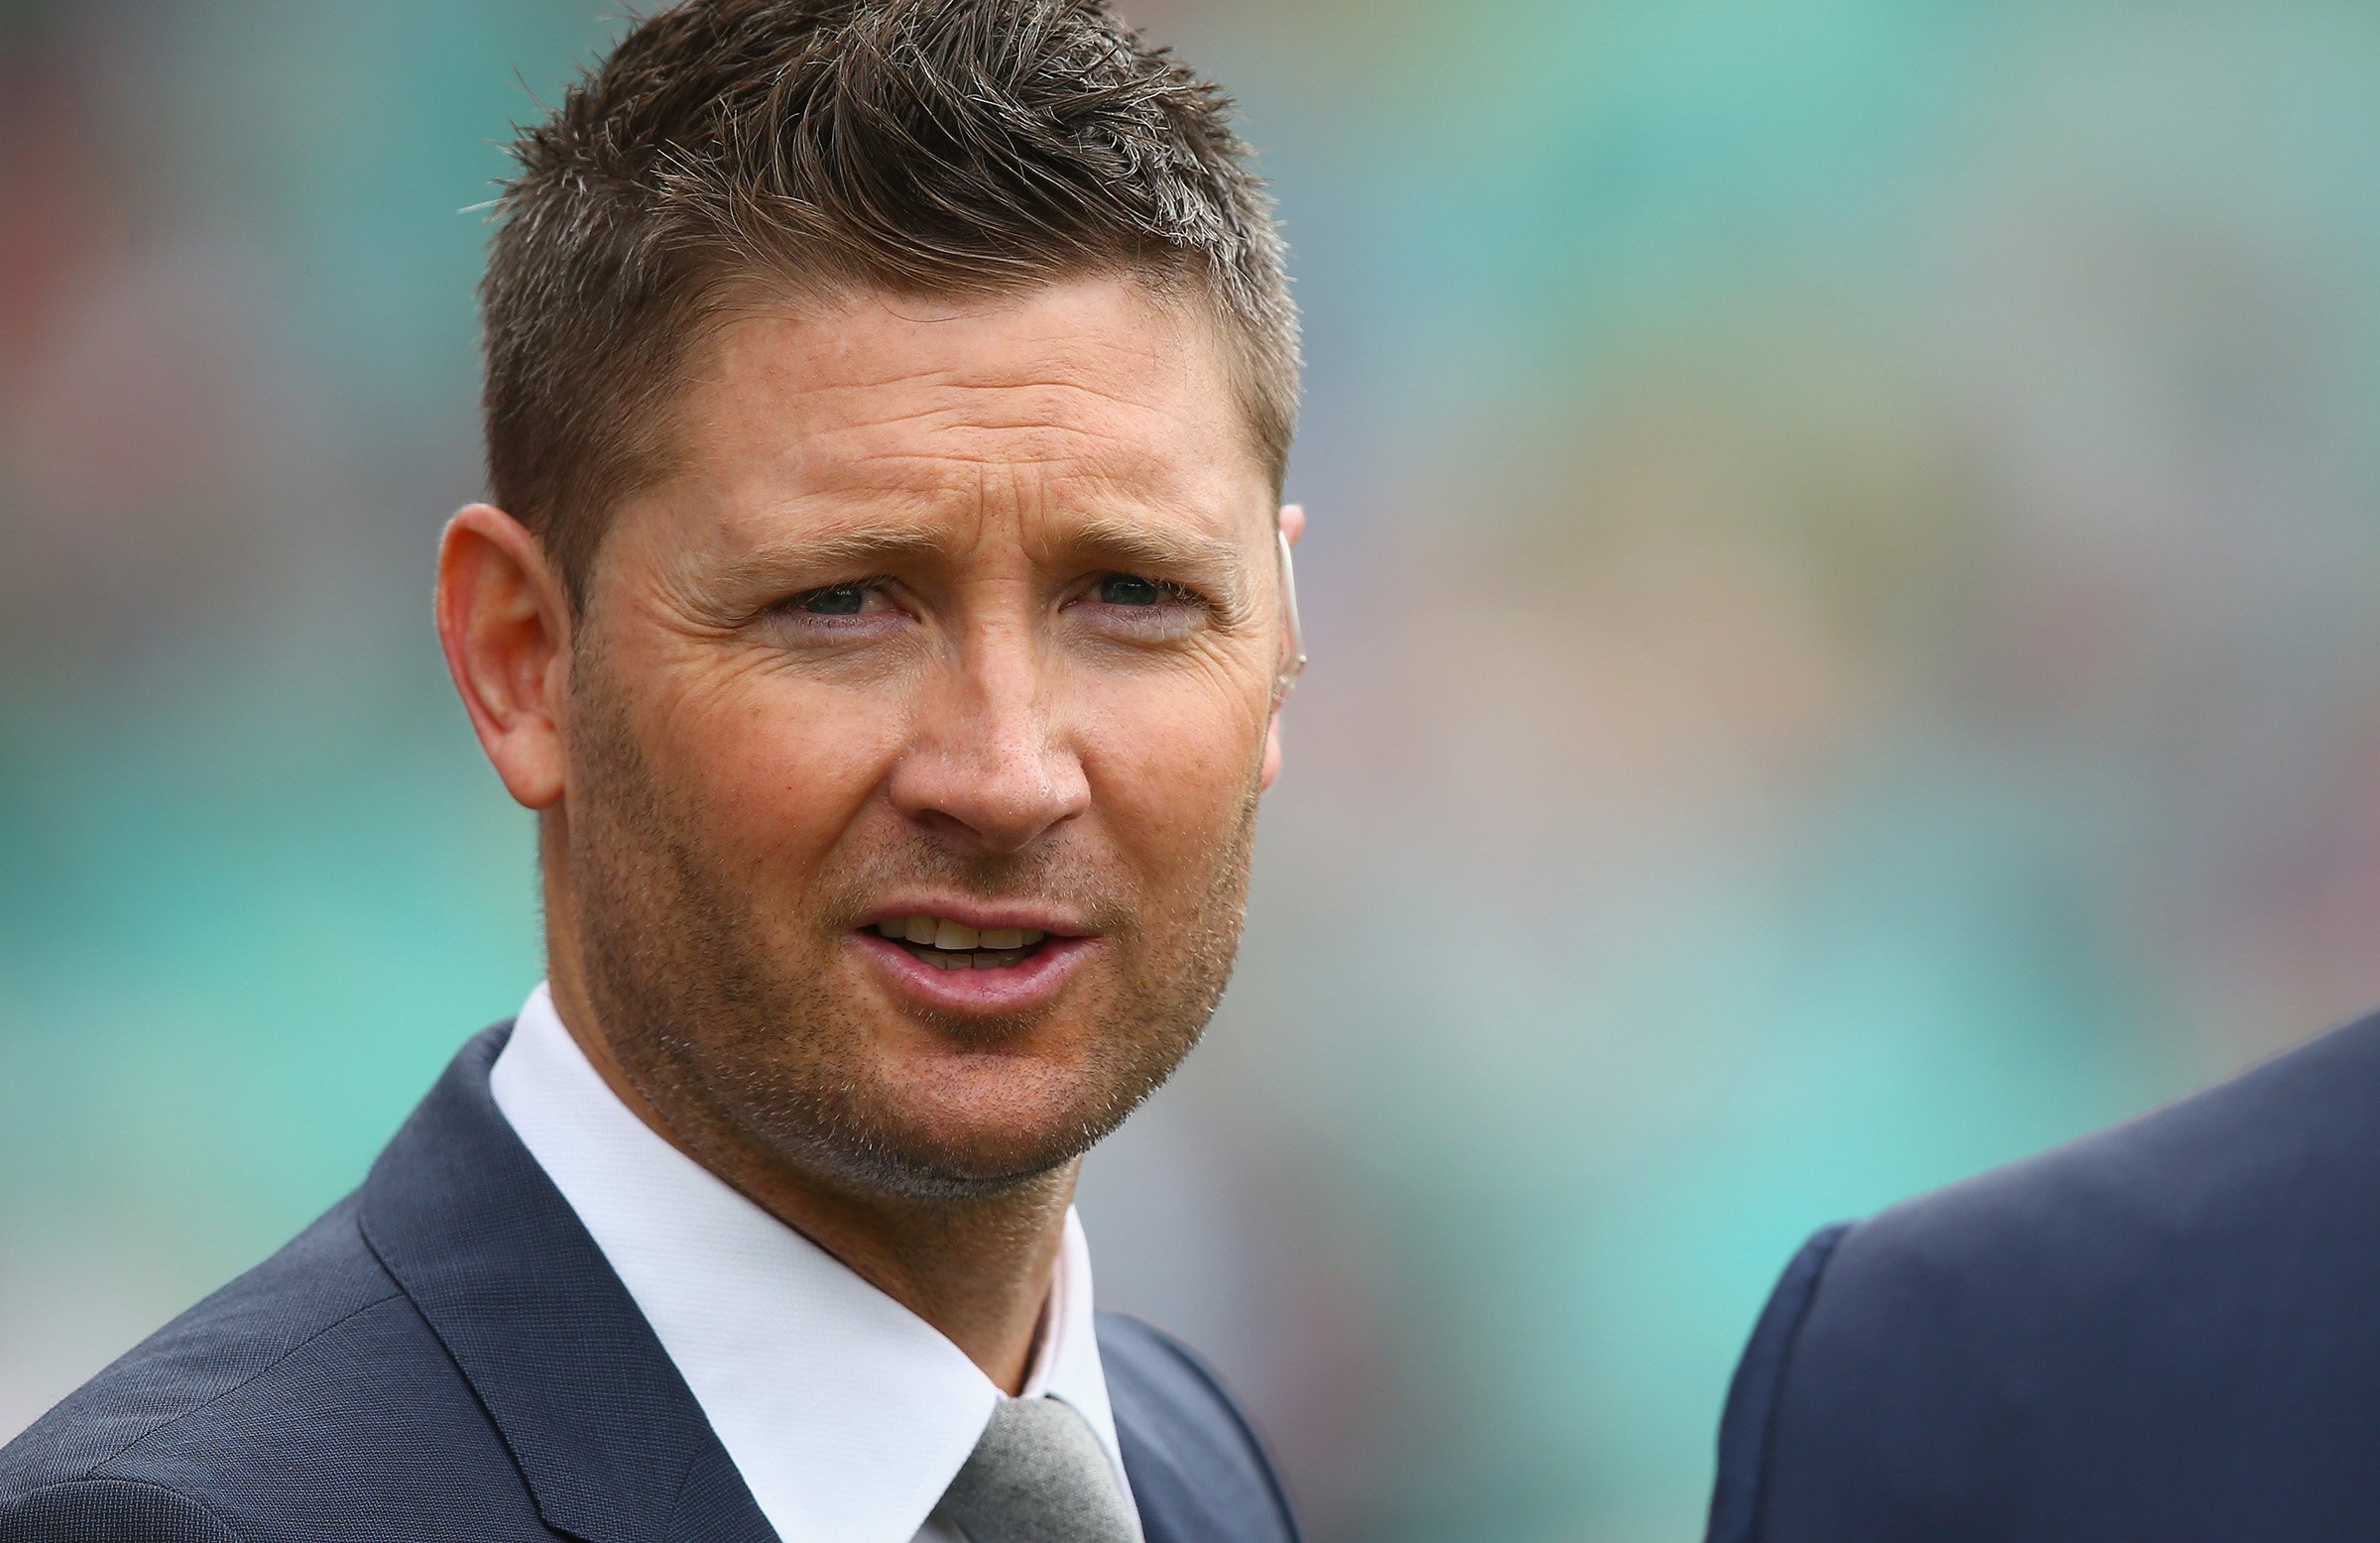 IND vs AUS | Australia, sweep at right stage of the innings, advises Michael Clarke